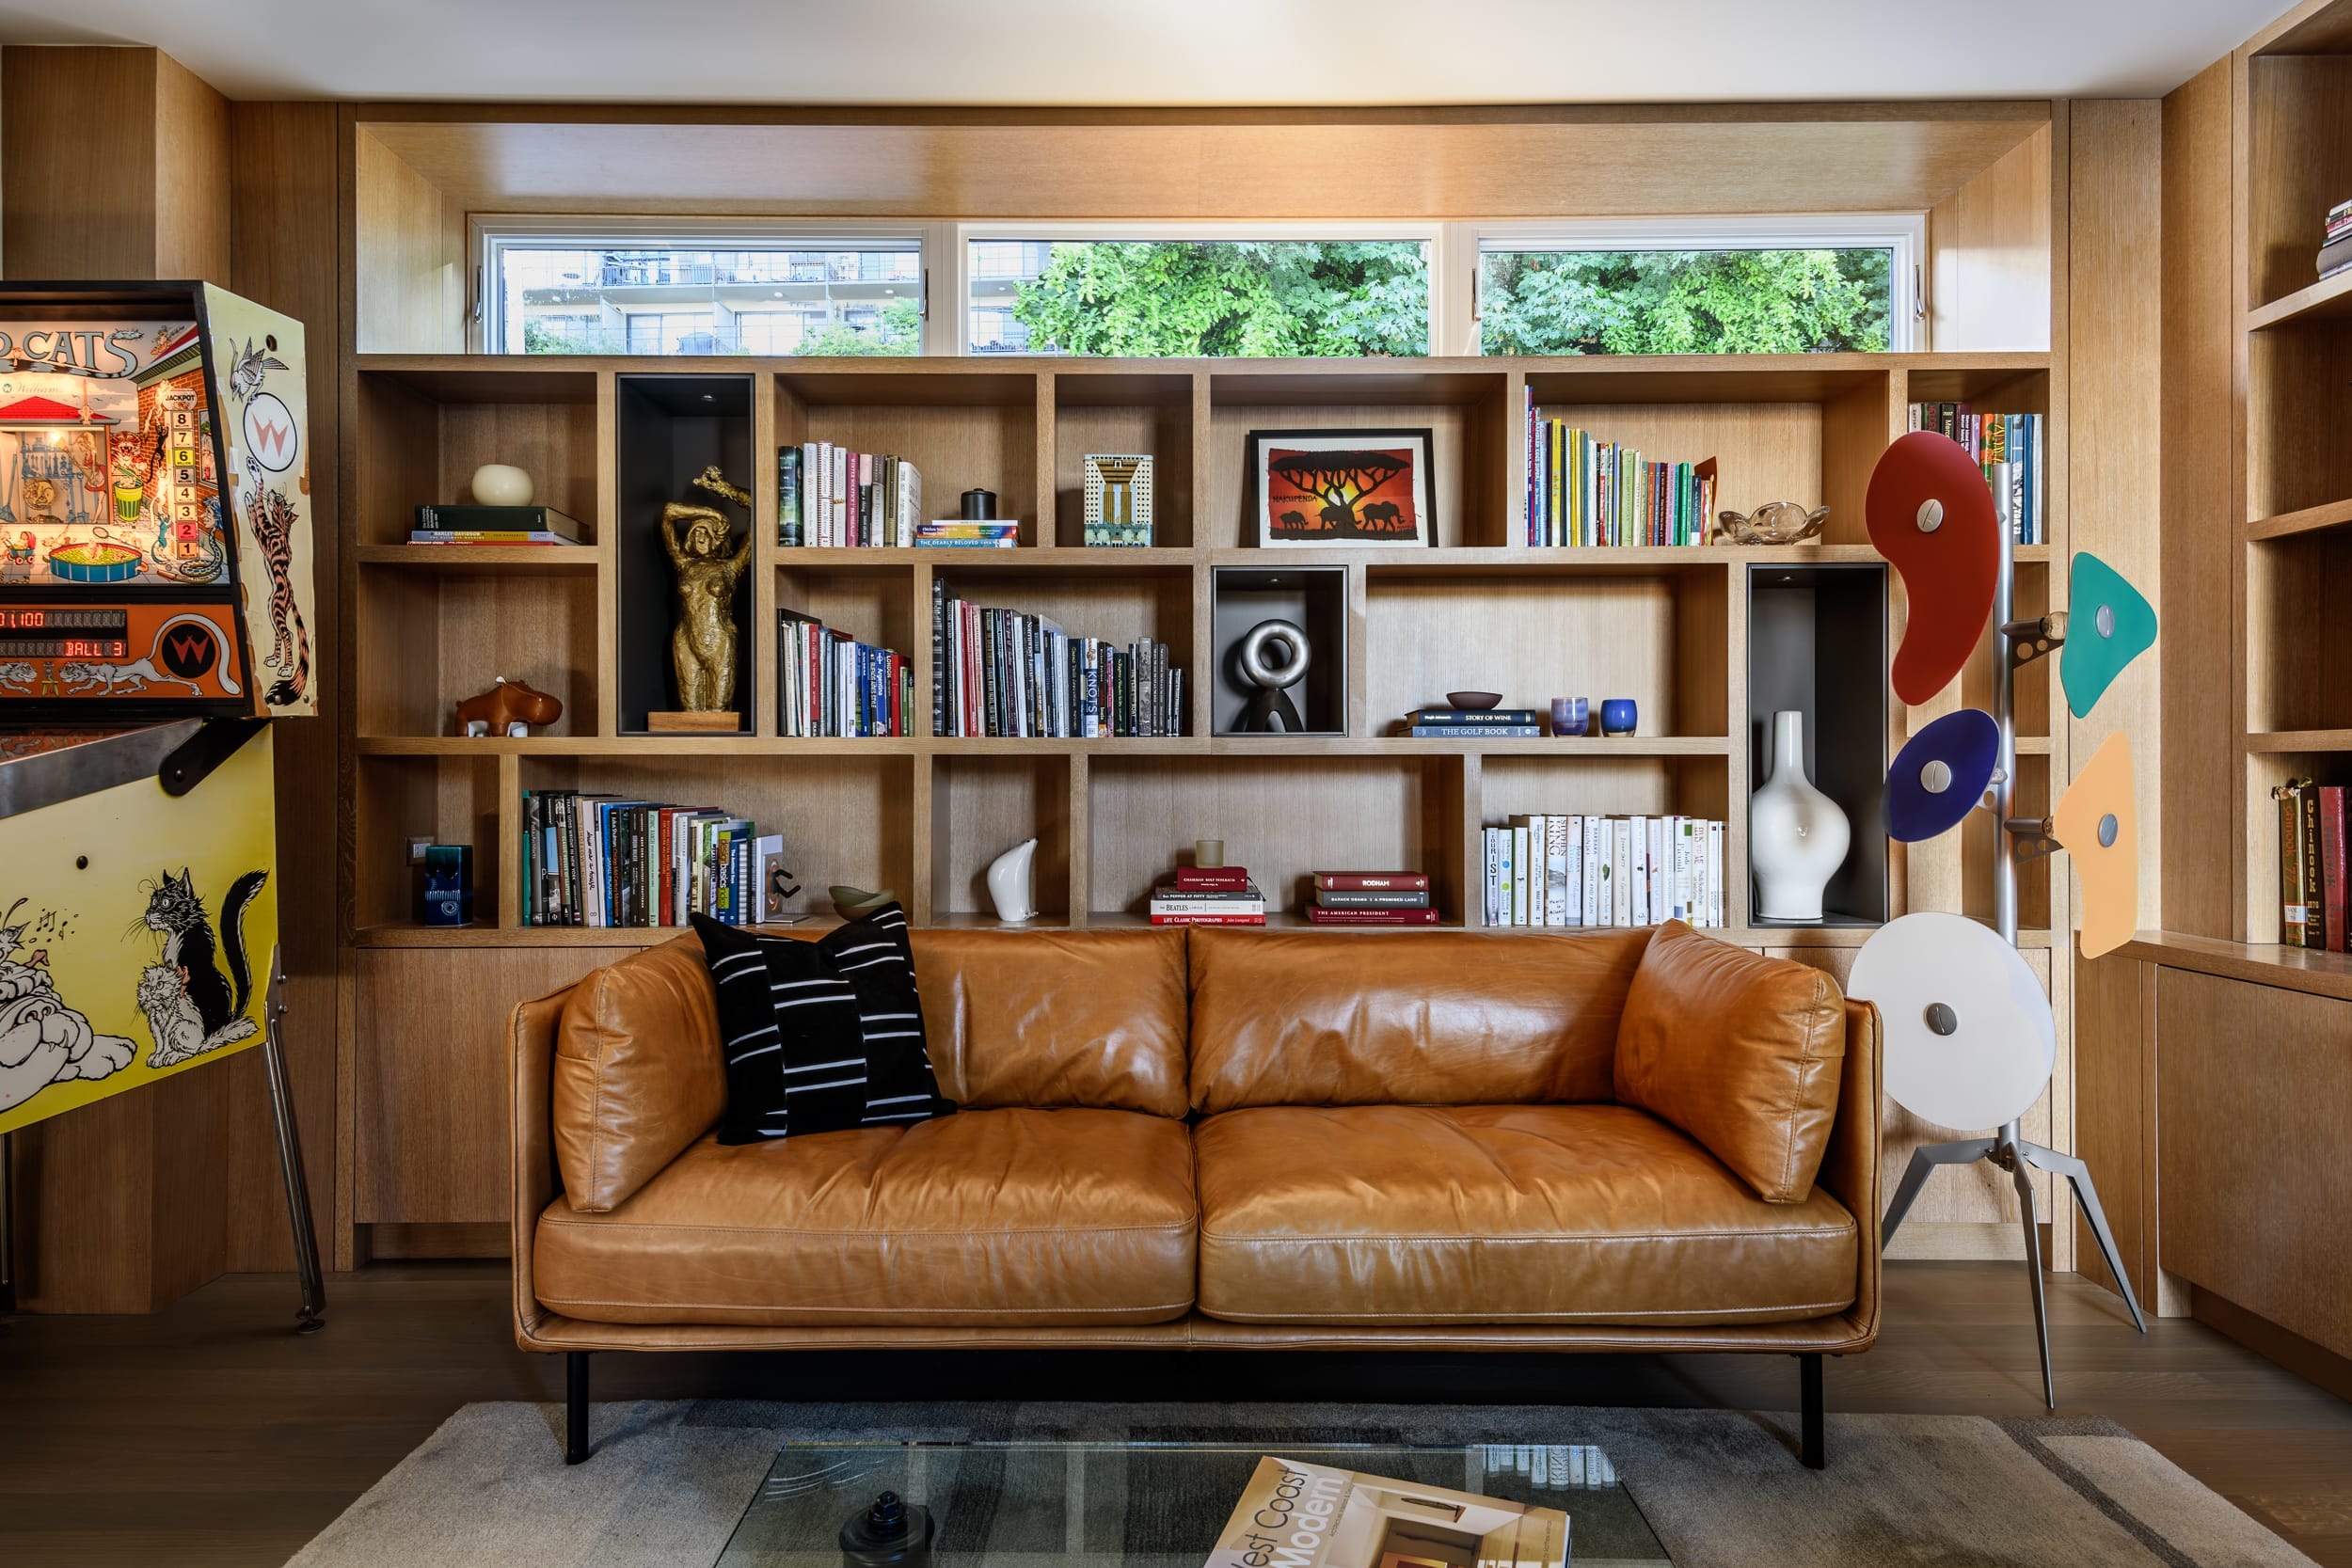 A living room with a leather couch and bookshelves.